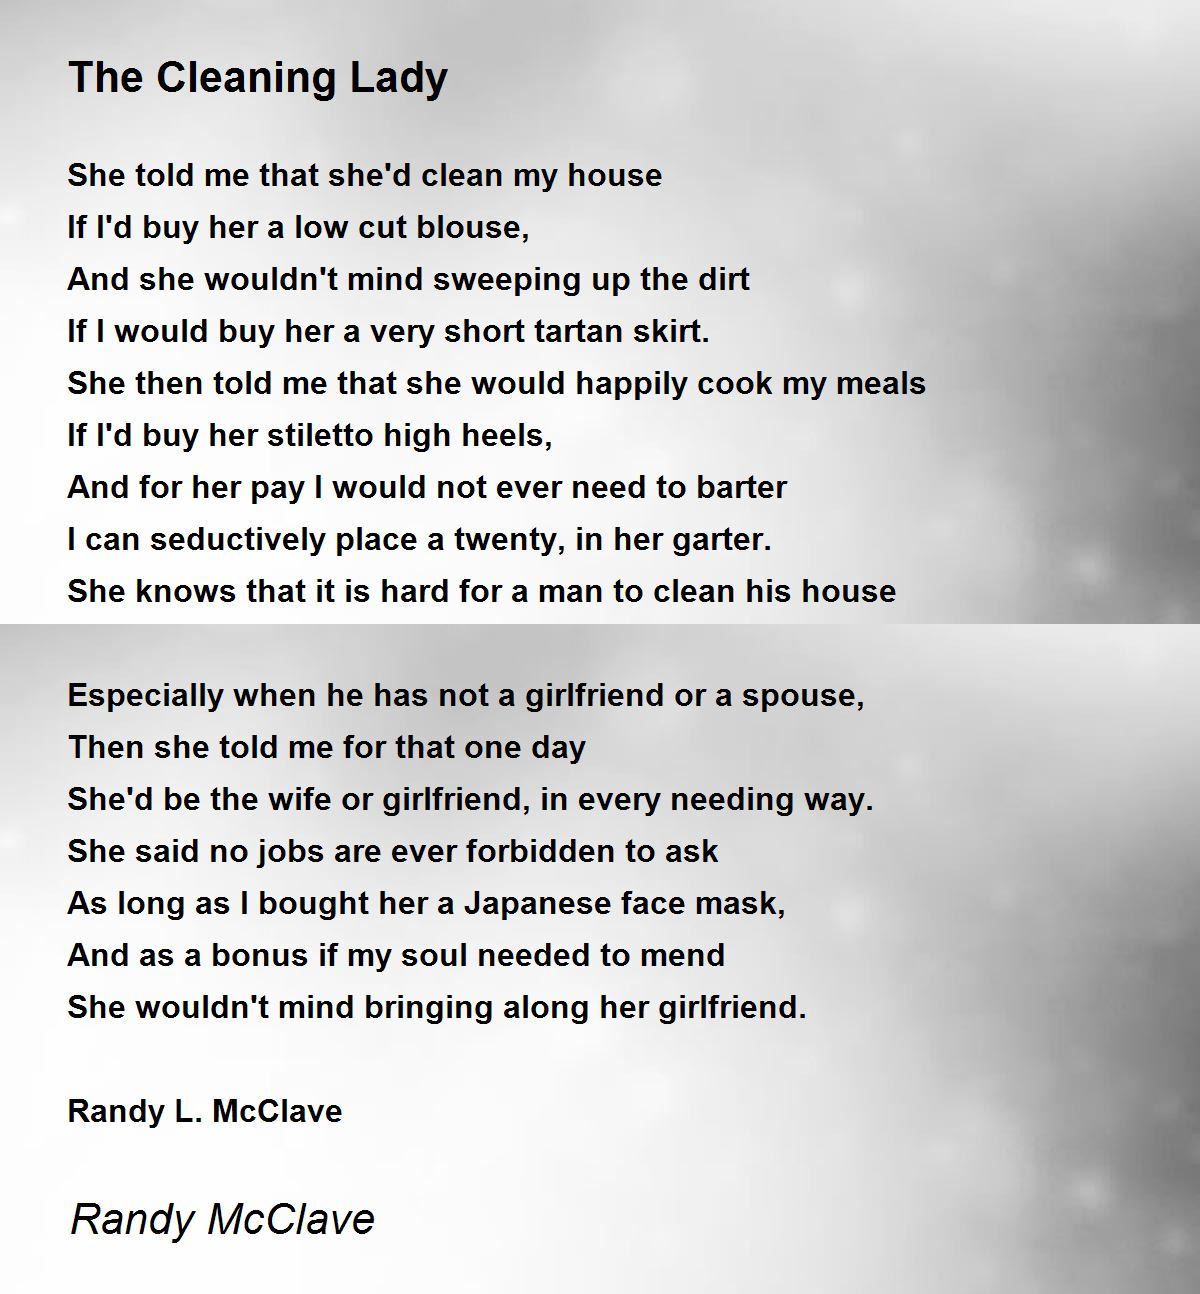 The Cleaning Lady - The Cleaning Lady Poem by Randy McClave